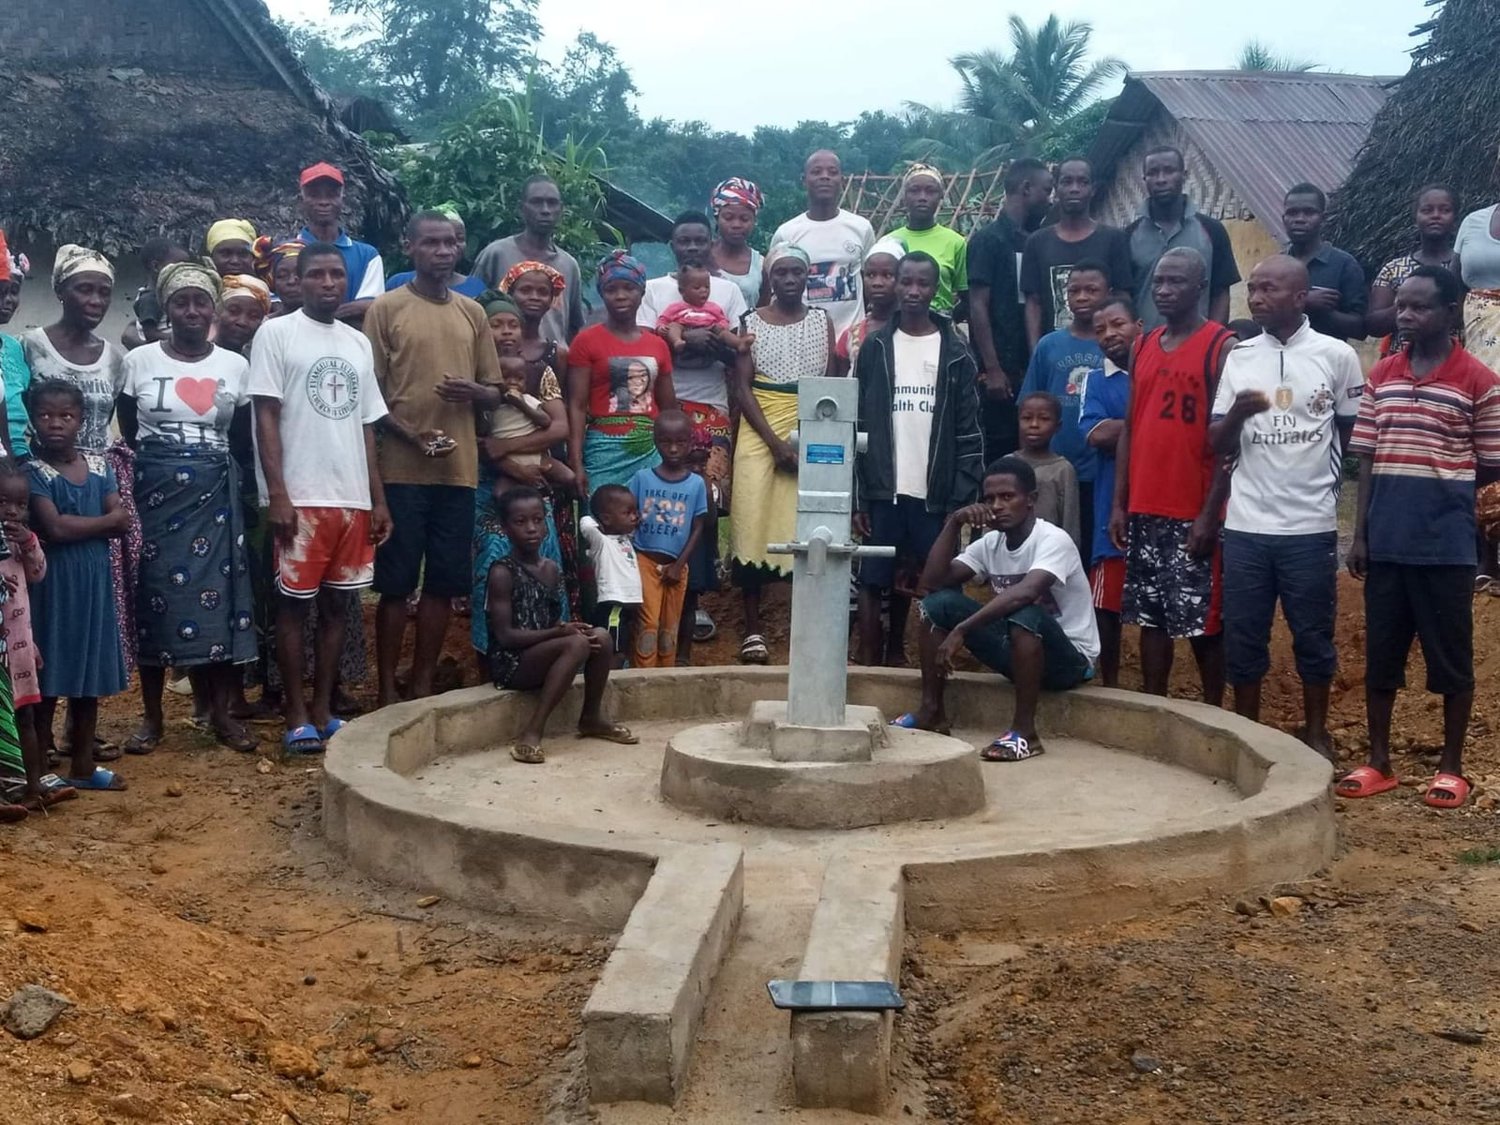 Residents of a Liberian village pose with their new water well completed by Liberia Mission Outreach International.